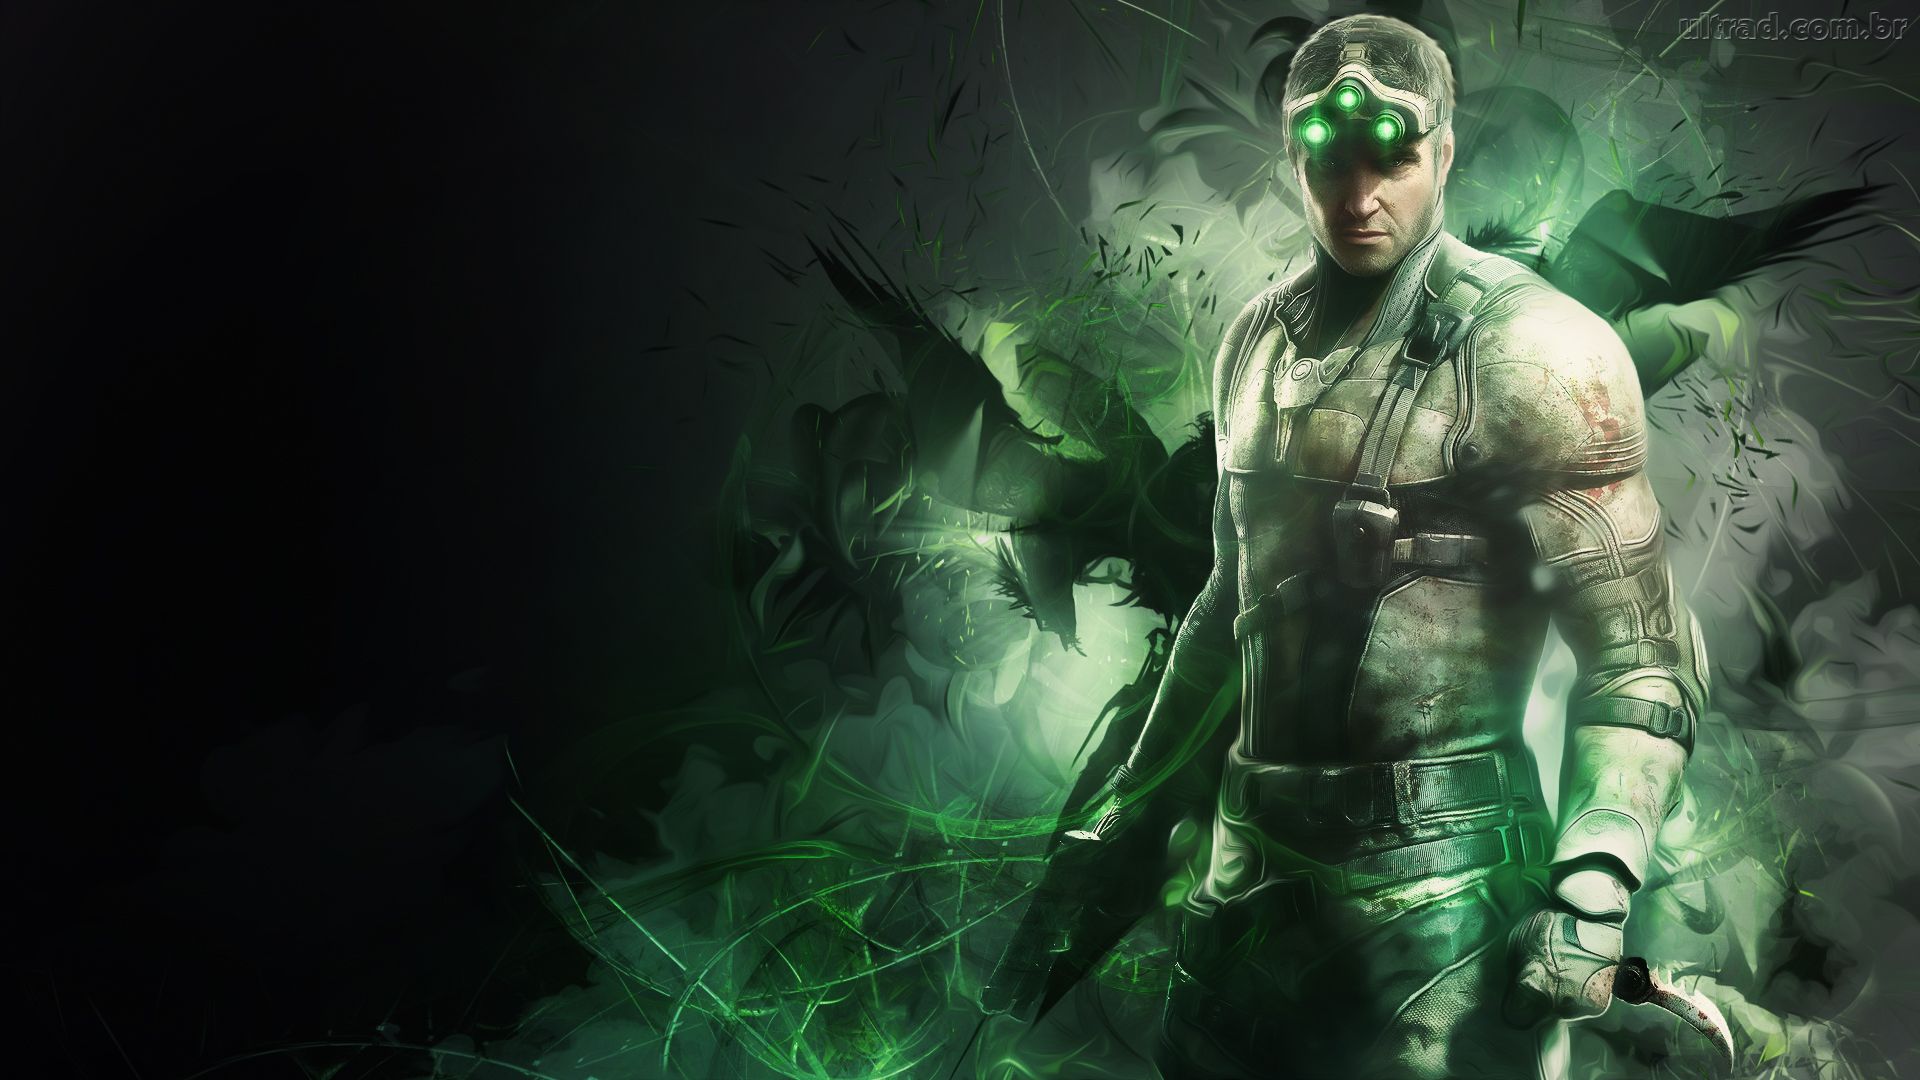 TGDB - Browse - Game - Tom Clancy's Splinter Cell: Double Agent